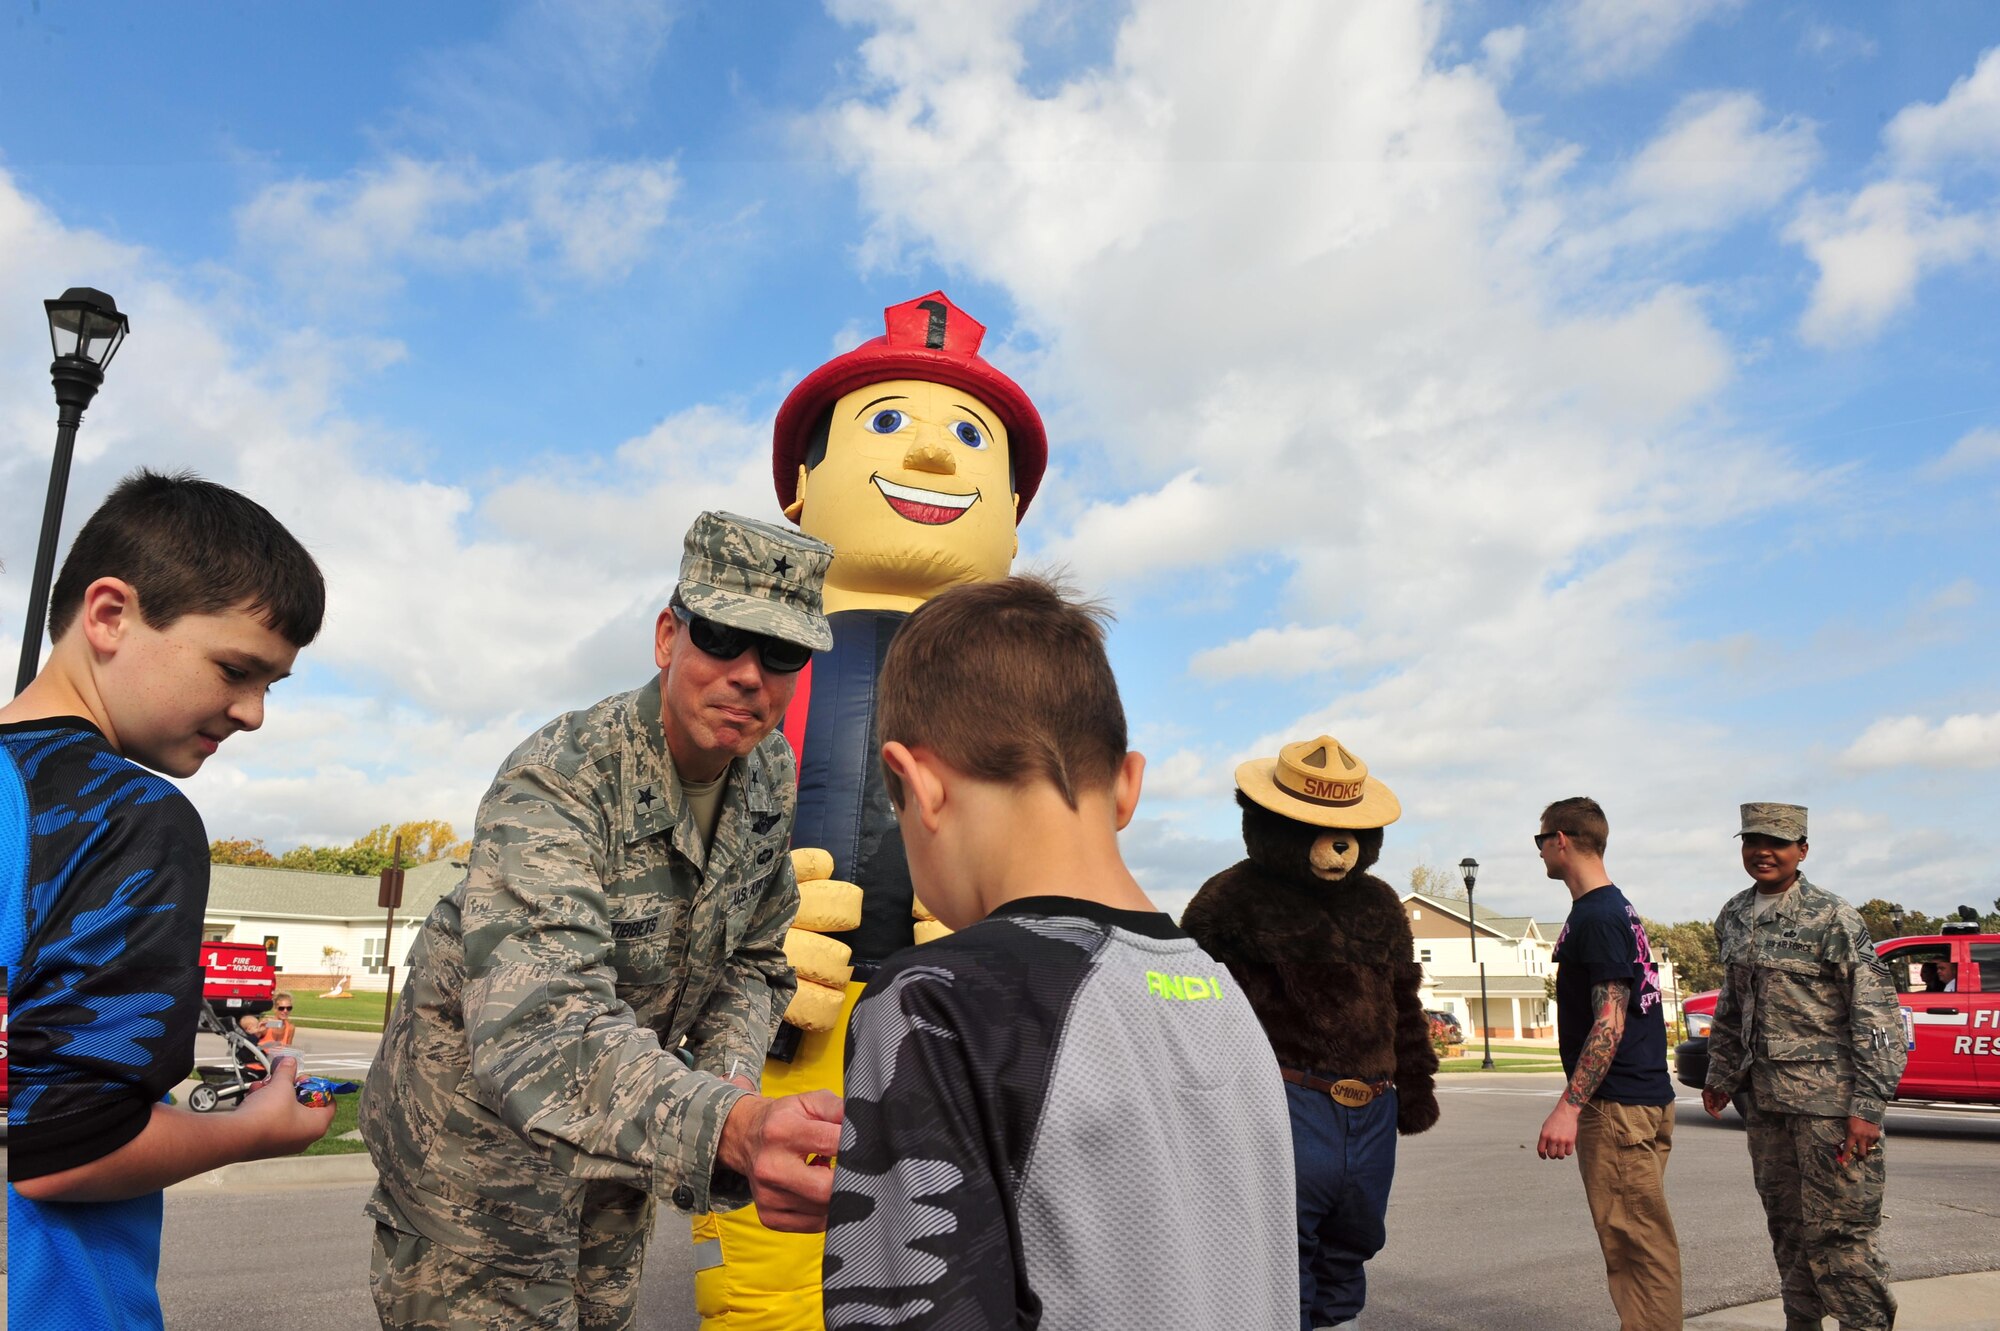 Brig. Gen. Paul W.Tibbets IV passes out candy to members of Team Whiteman during a Fire Prevention Week parade at Whiteman Air Force Base, Mo., Oct. 15, 2016. The parade passed through base housing and concluded at the base commissary. (U.S. Air Force photo by Senior Airman Jovan Banks)